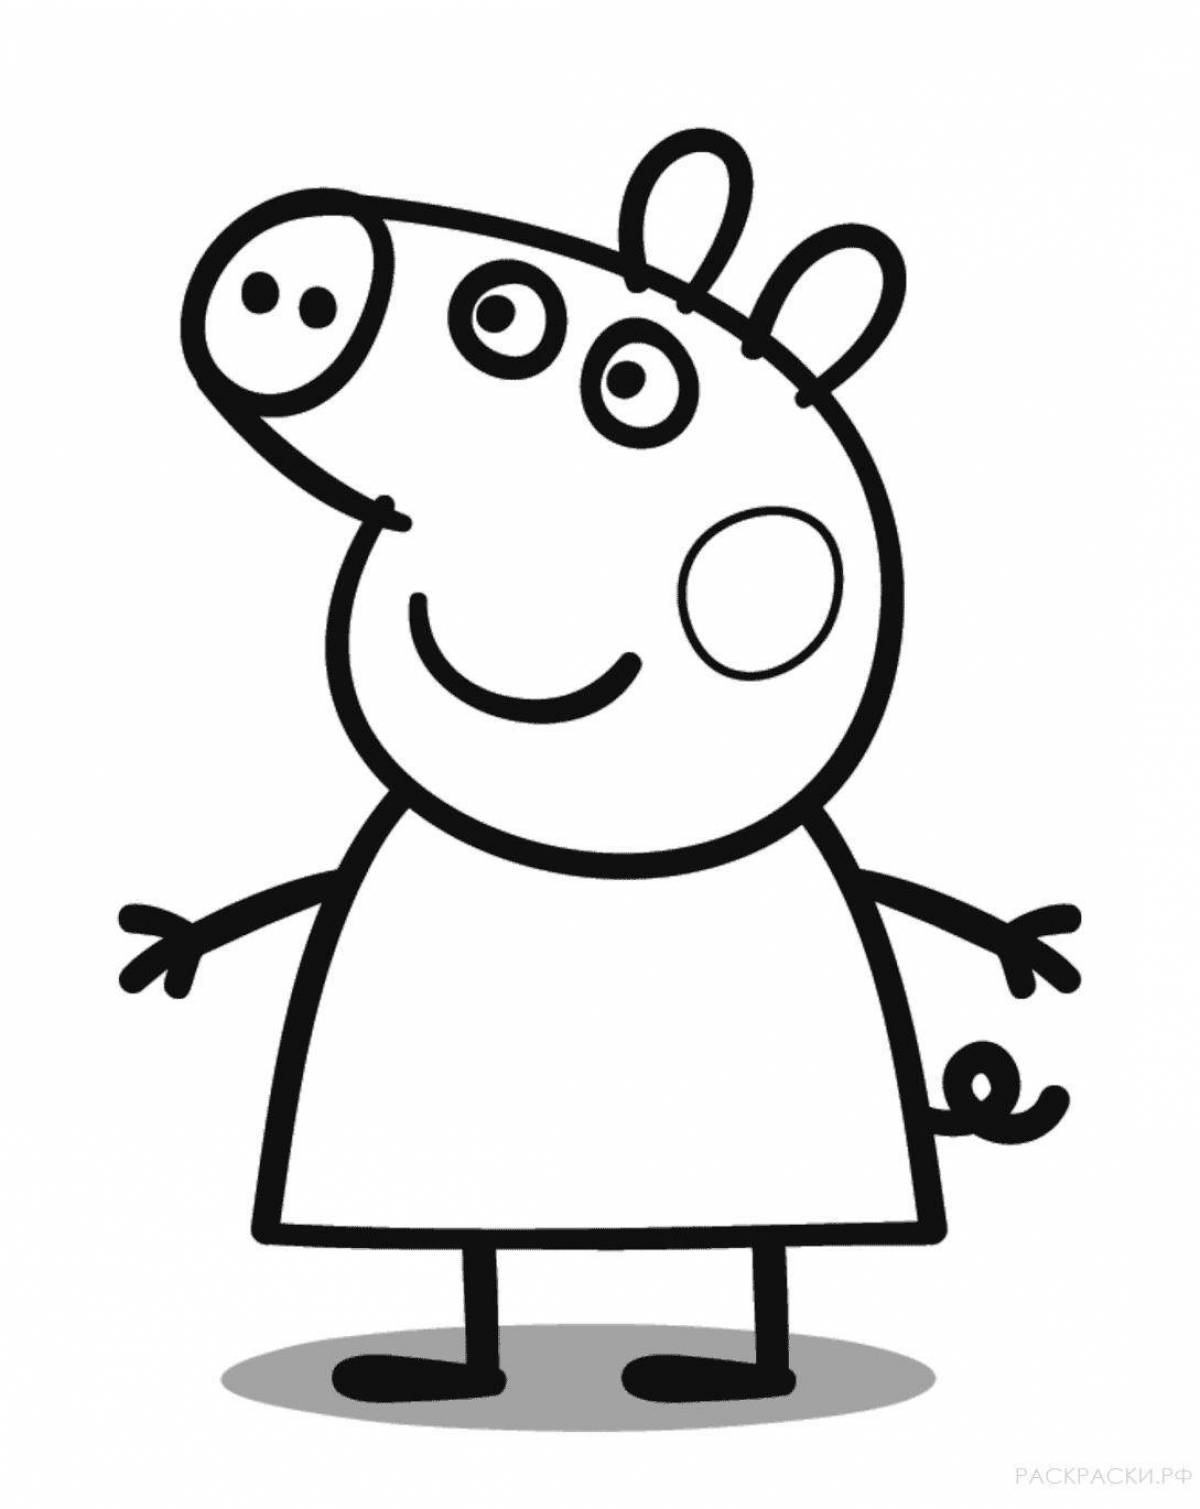 Colorful peppa pig coloring book for kids